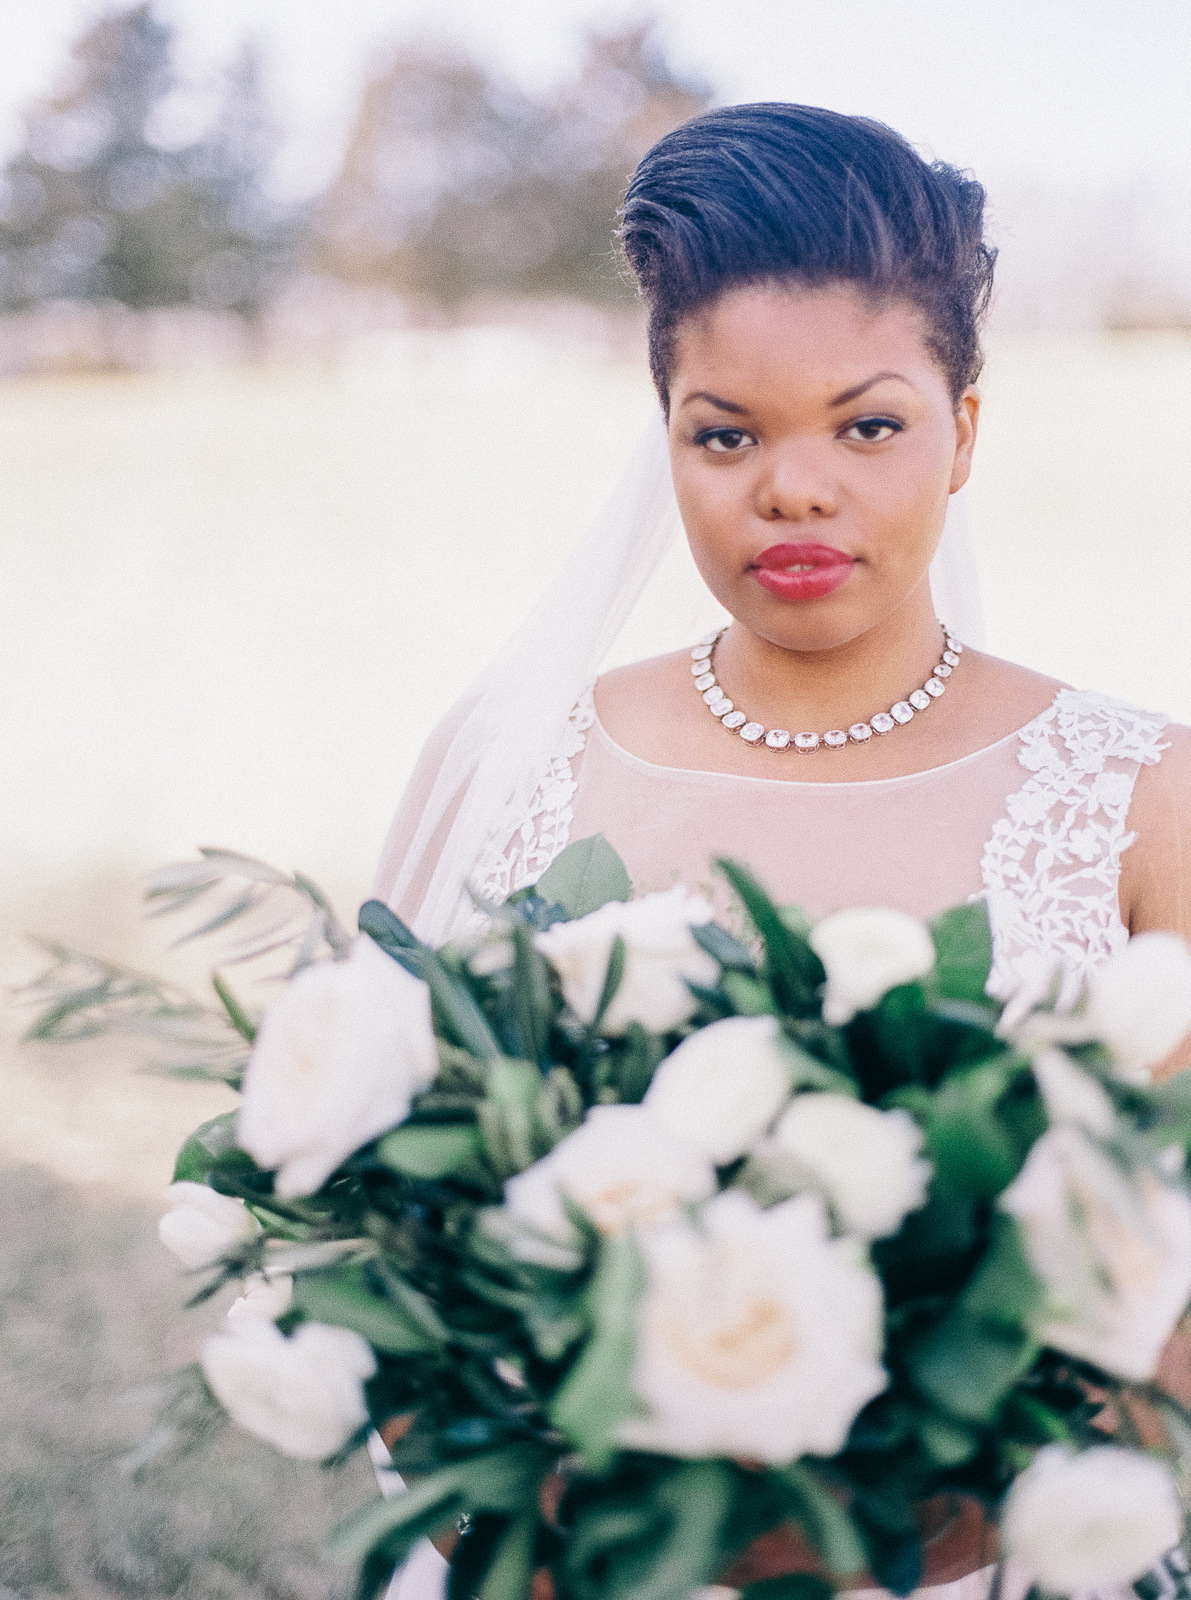 View More: http://nikkisanterre.pass.us/pretty-pear-bride-feature-sneakpeek